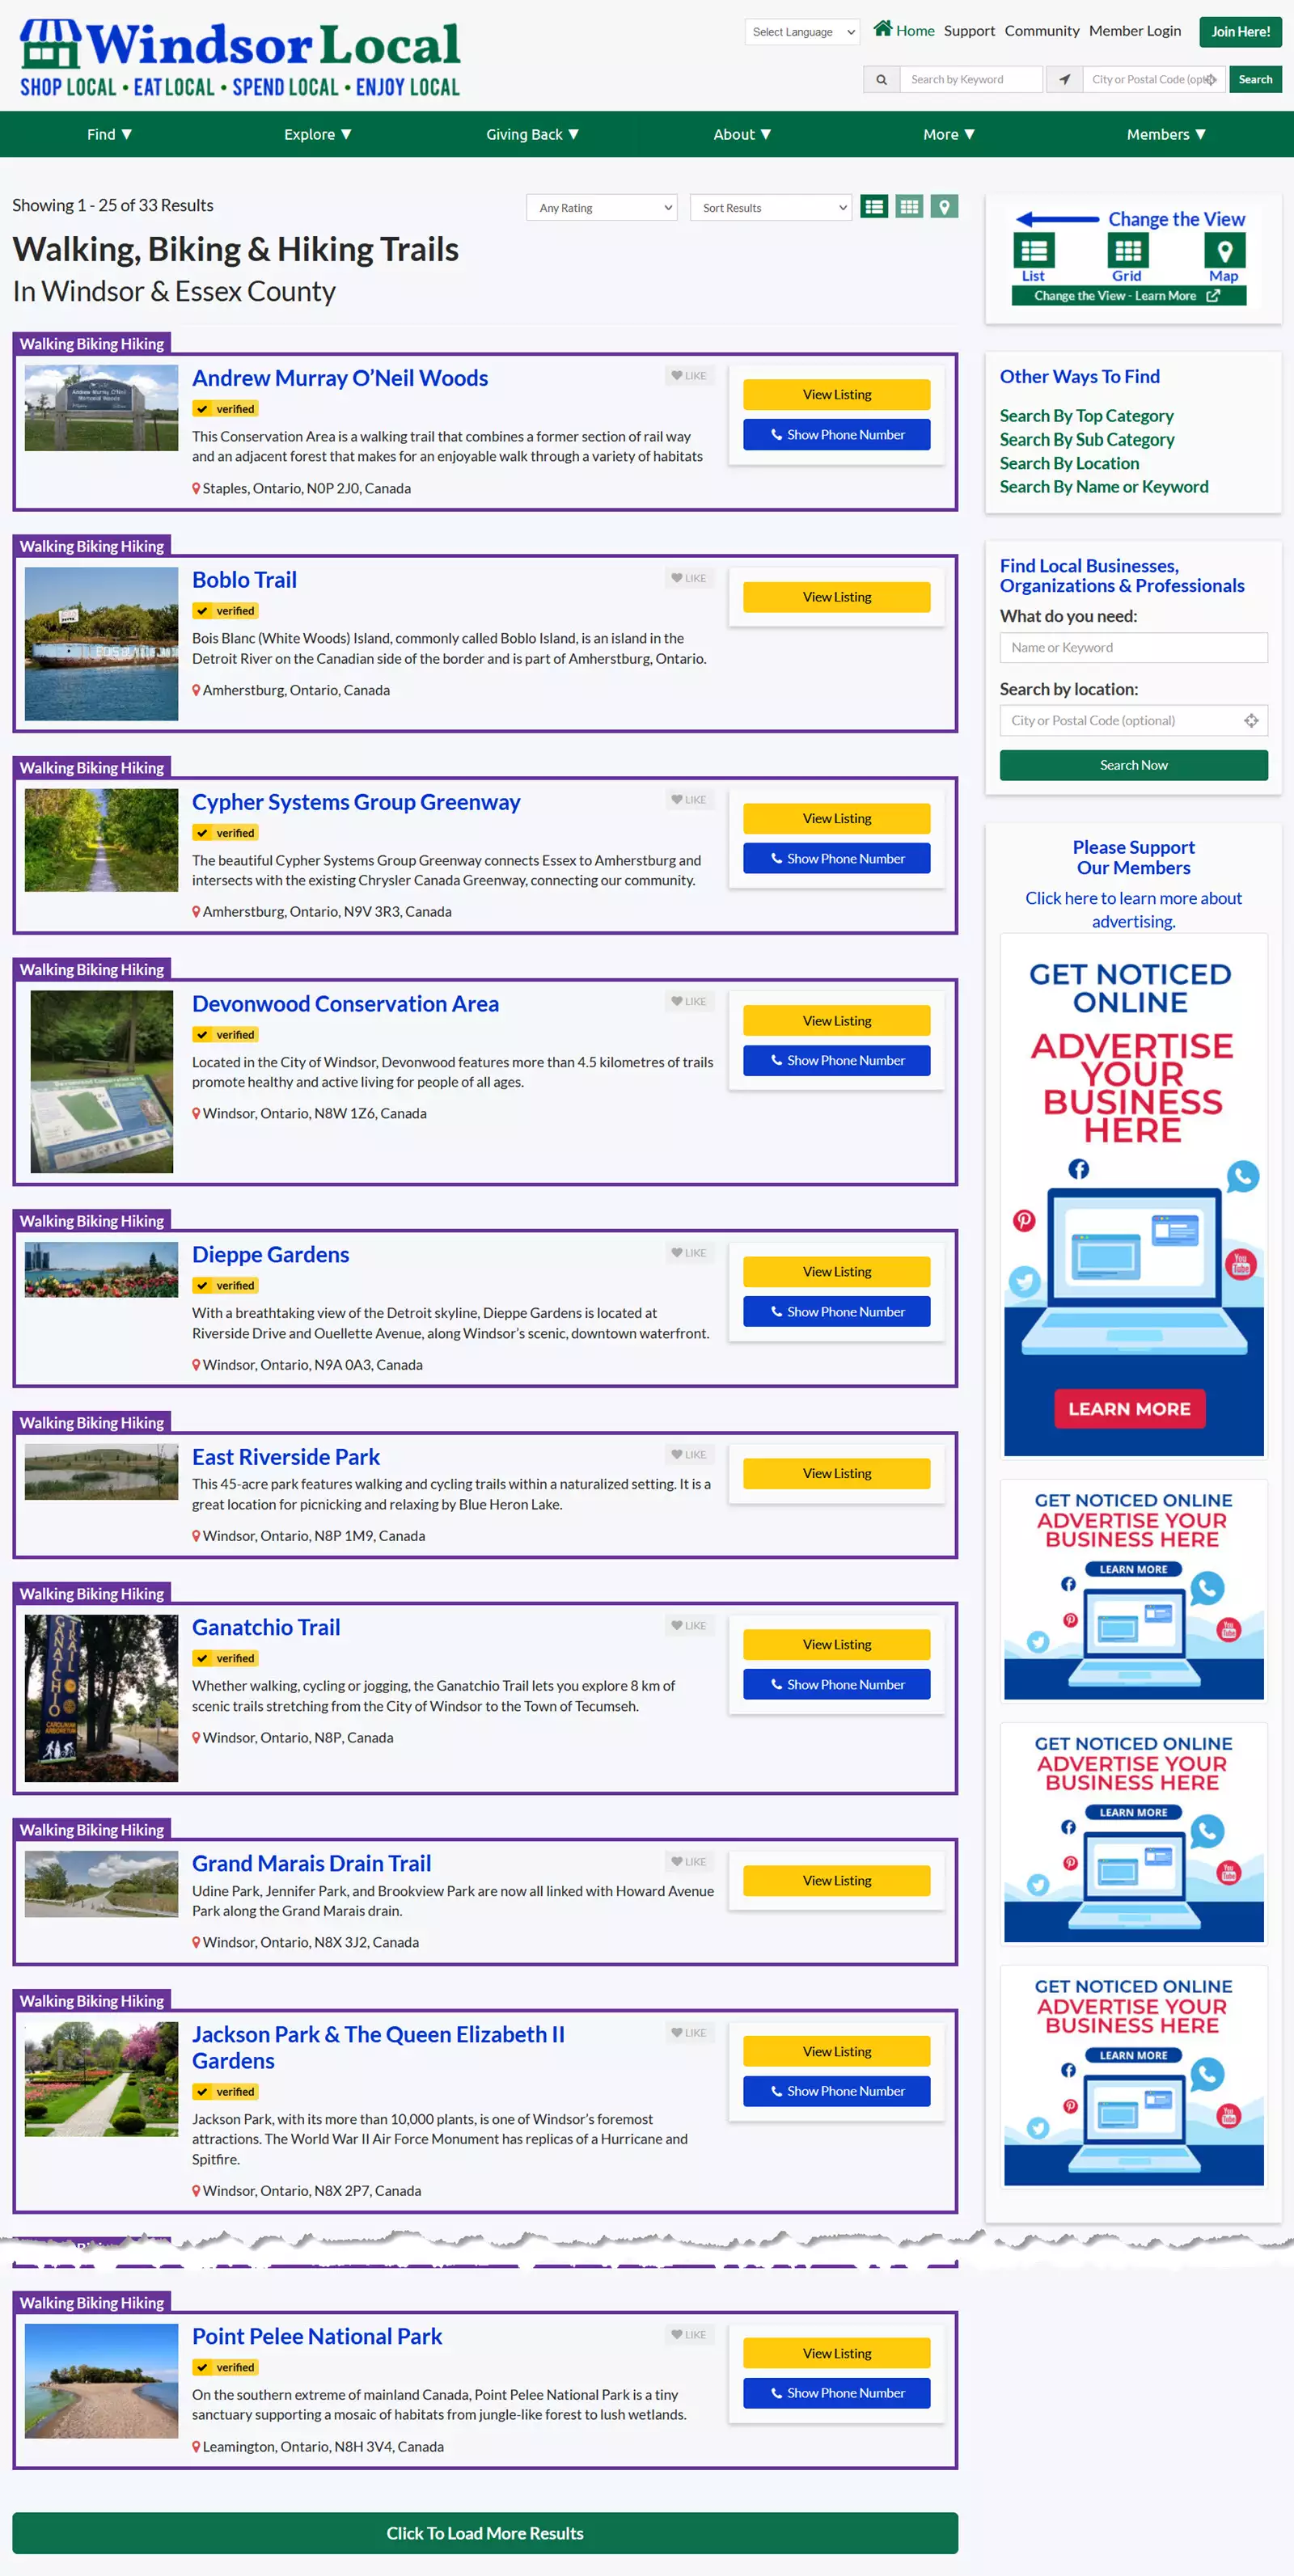 Windsor Local Walking, Biking & Hiking Posts Search Summary Results view